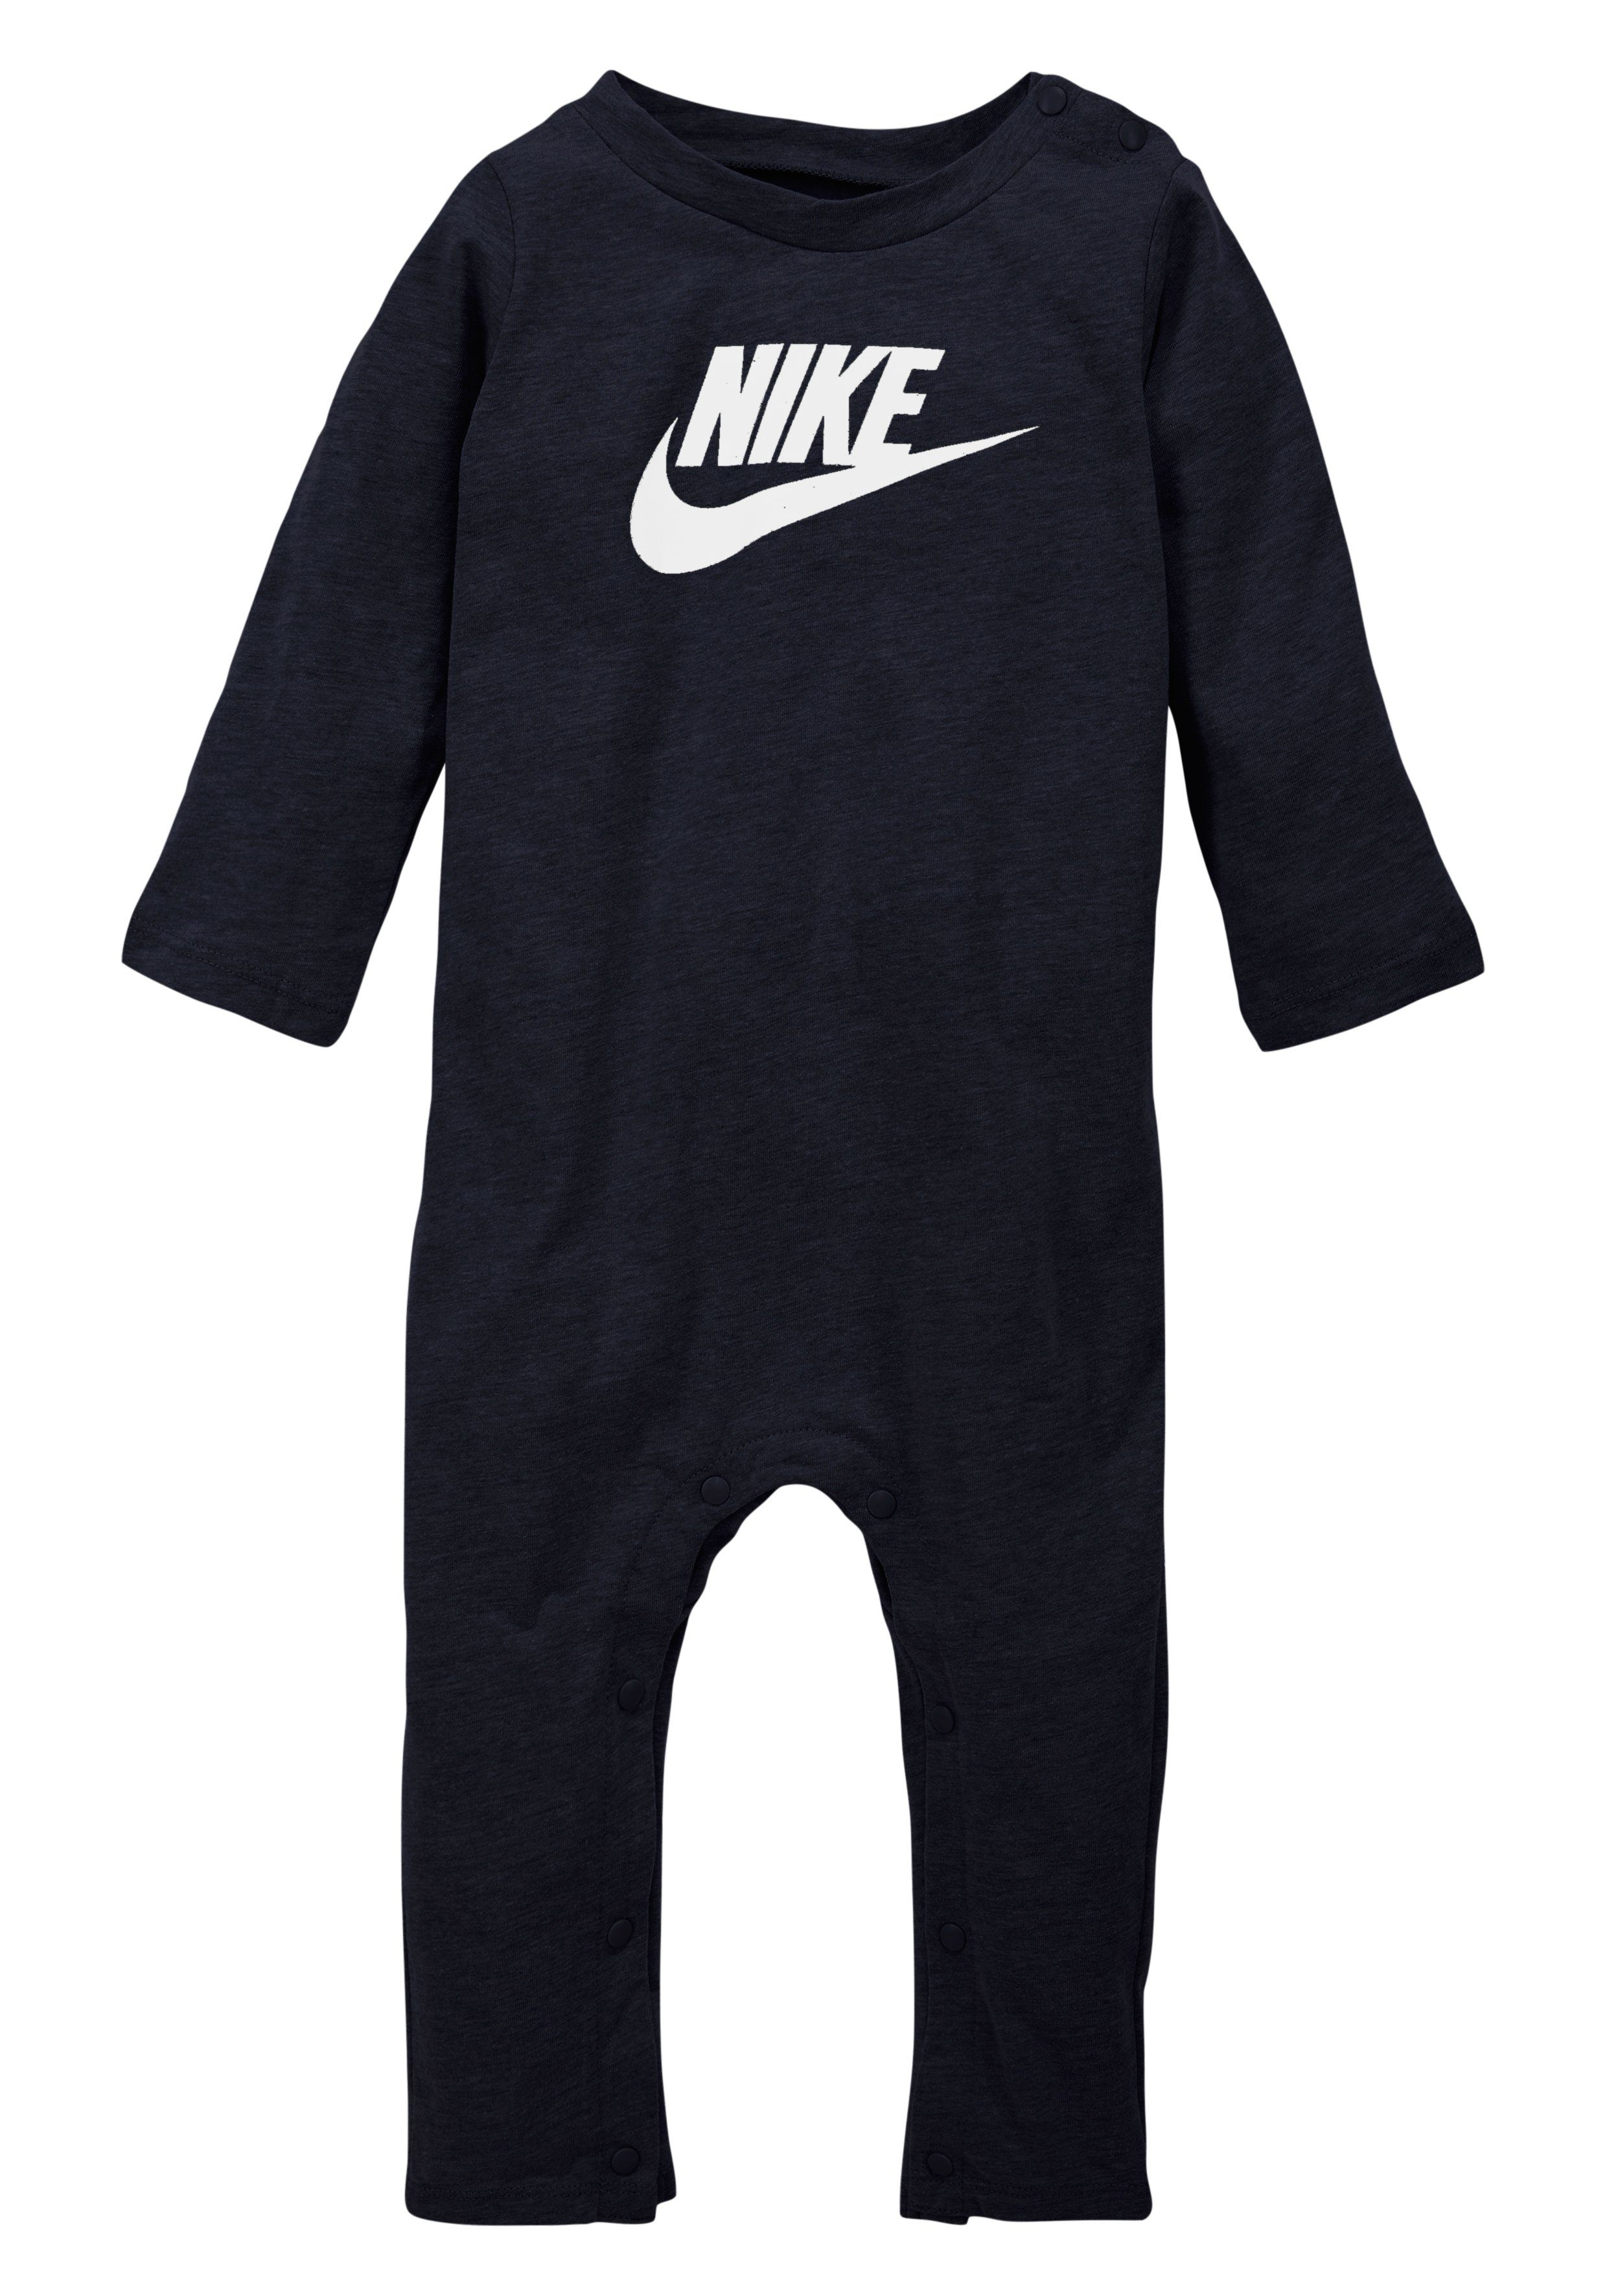 Nike COVERALL obsidian Strampler HBR NON-FOOTED Sportswear